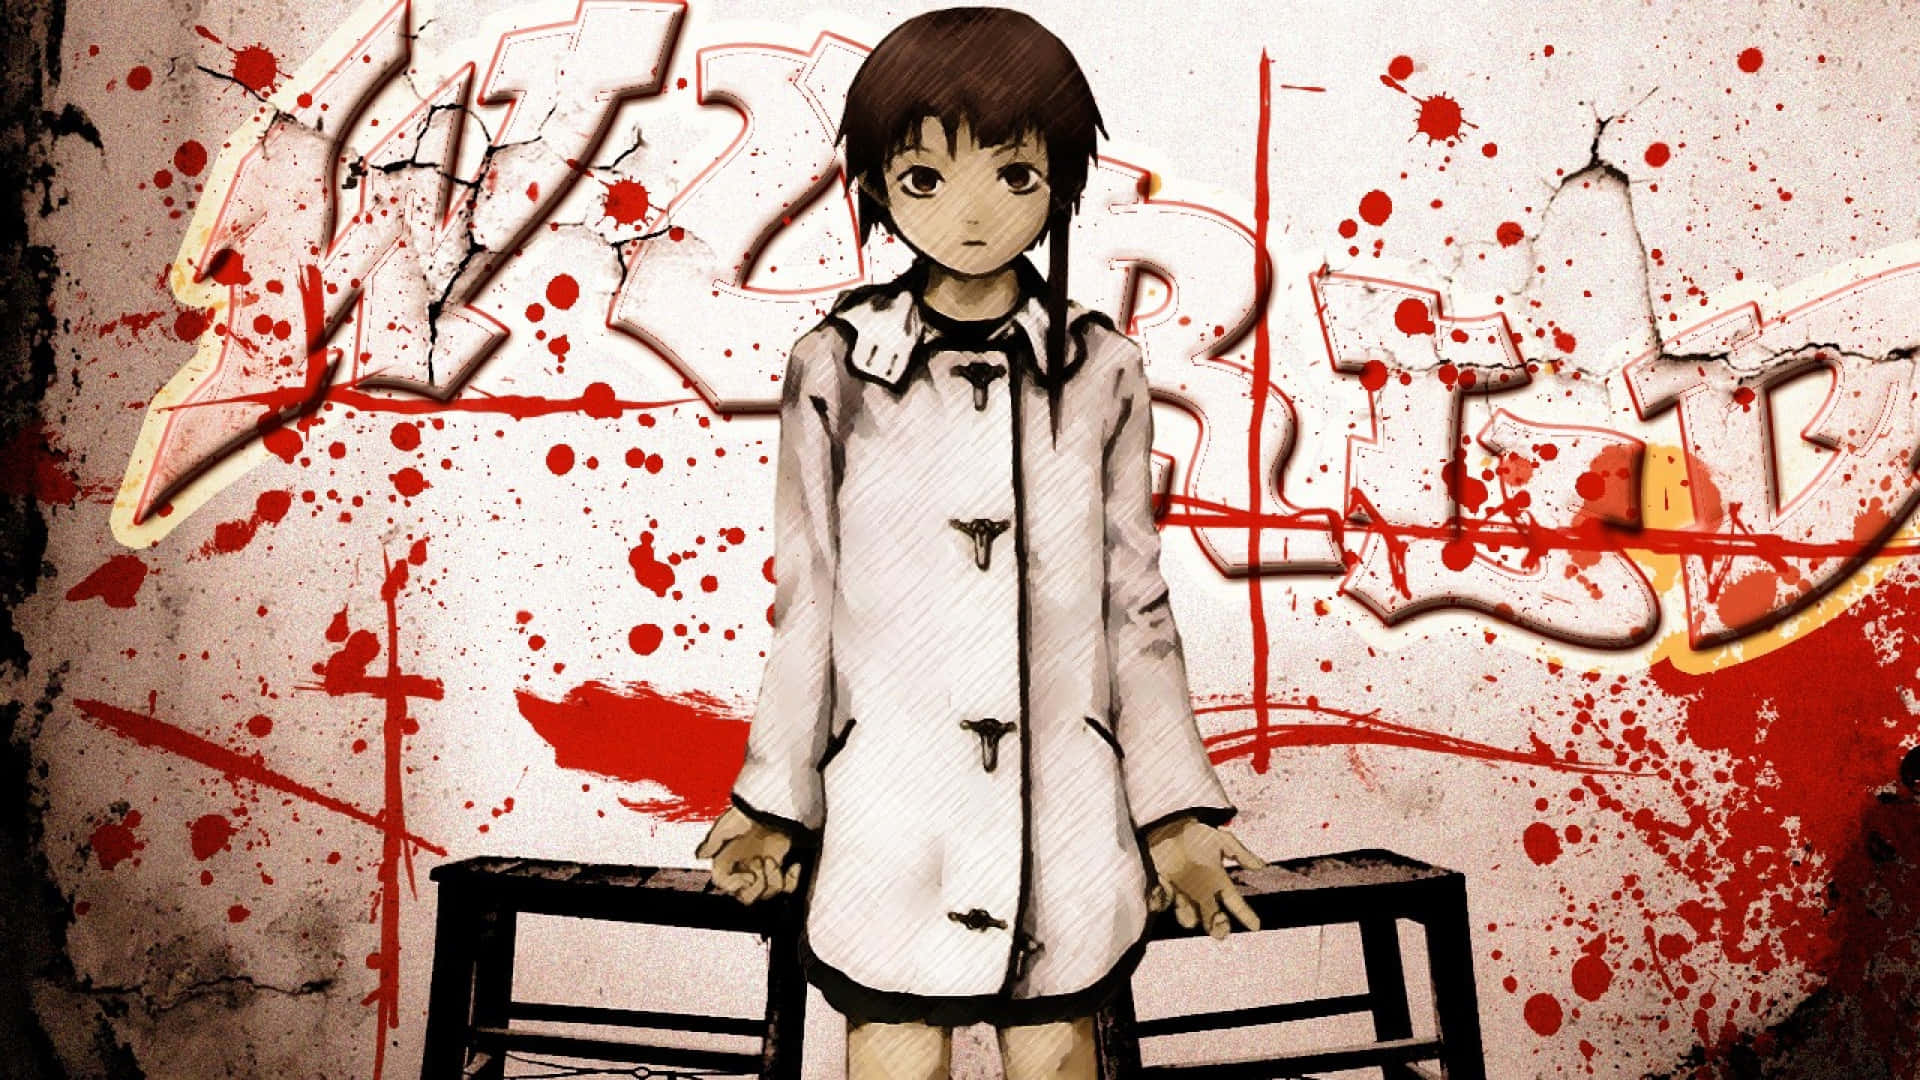 Serial Experiments Lain and the Search for Meaning - YouTube